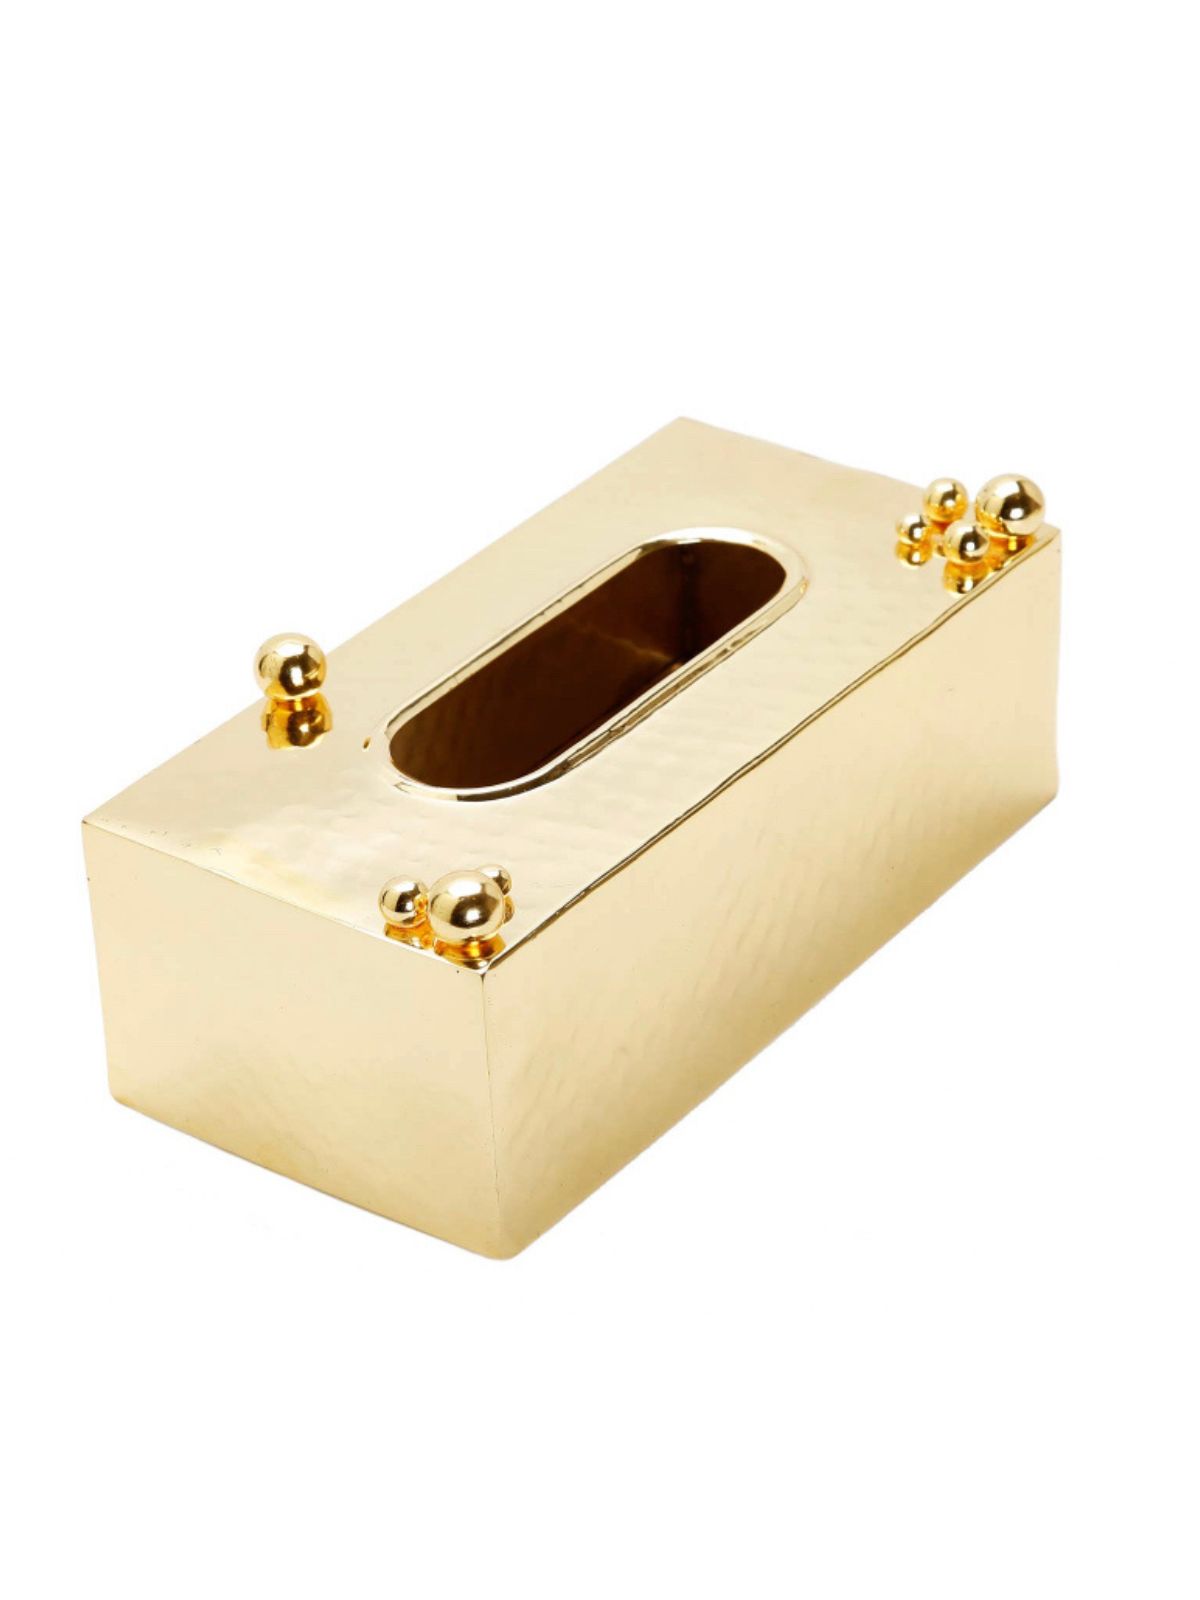 11L Luxury Stainless Steel Gold Hammered Tissue Box with Ball Design - KYA Home Decor